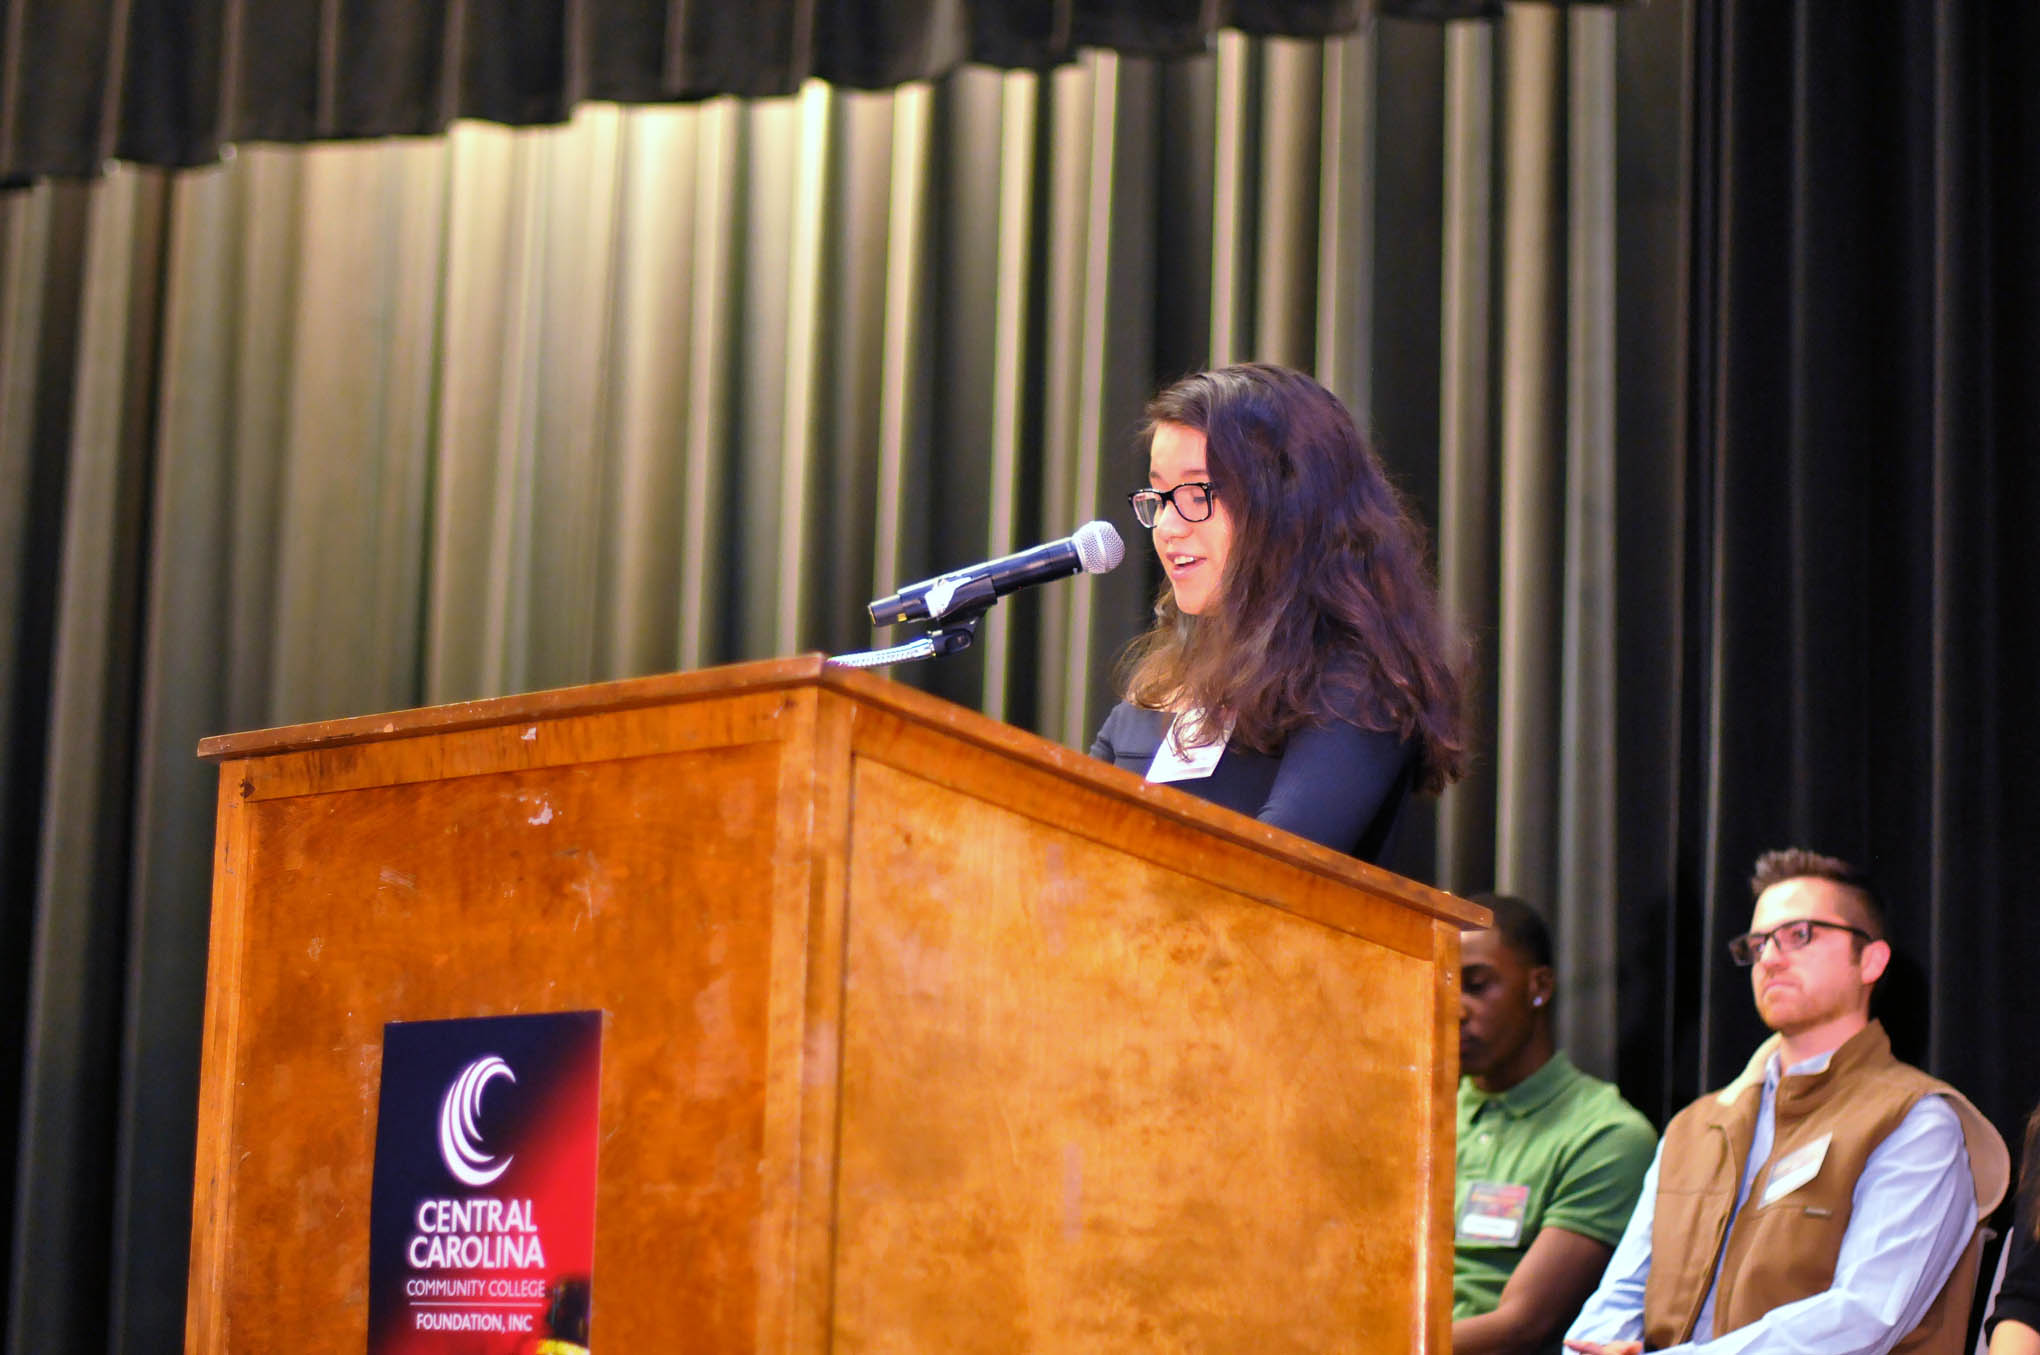 Click to enlarge,  Jacqueline Aguirre-Delgado was among the scholarship recipient speakers at the Central Carolina Community College Foundation Scholarship Luncheon on Wednesday, Nov. 20, at the Dennis A. Wicker Civic &amp; Conference Center.  